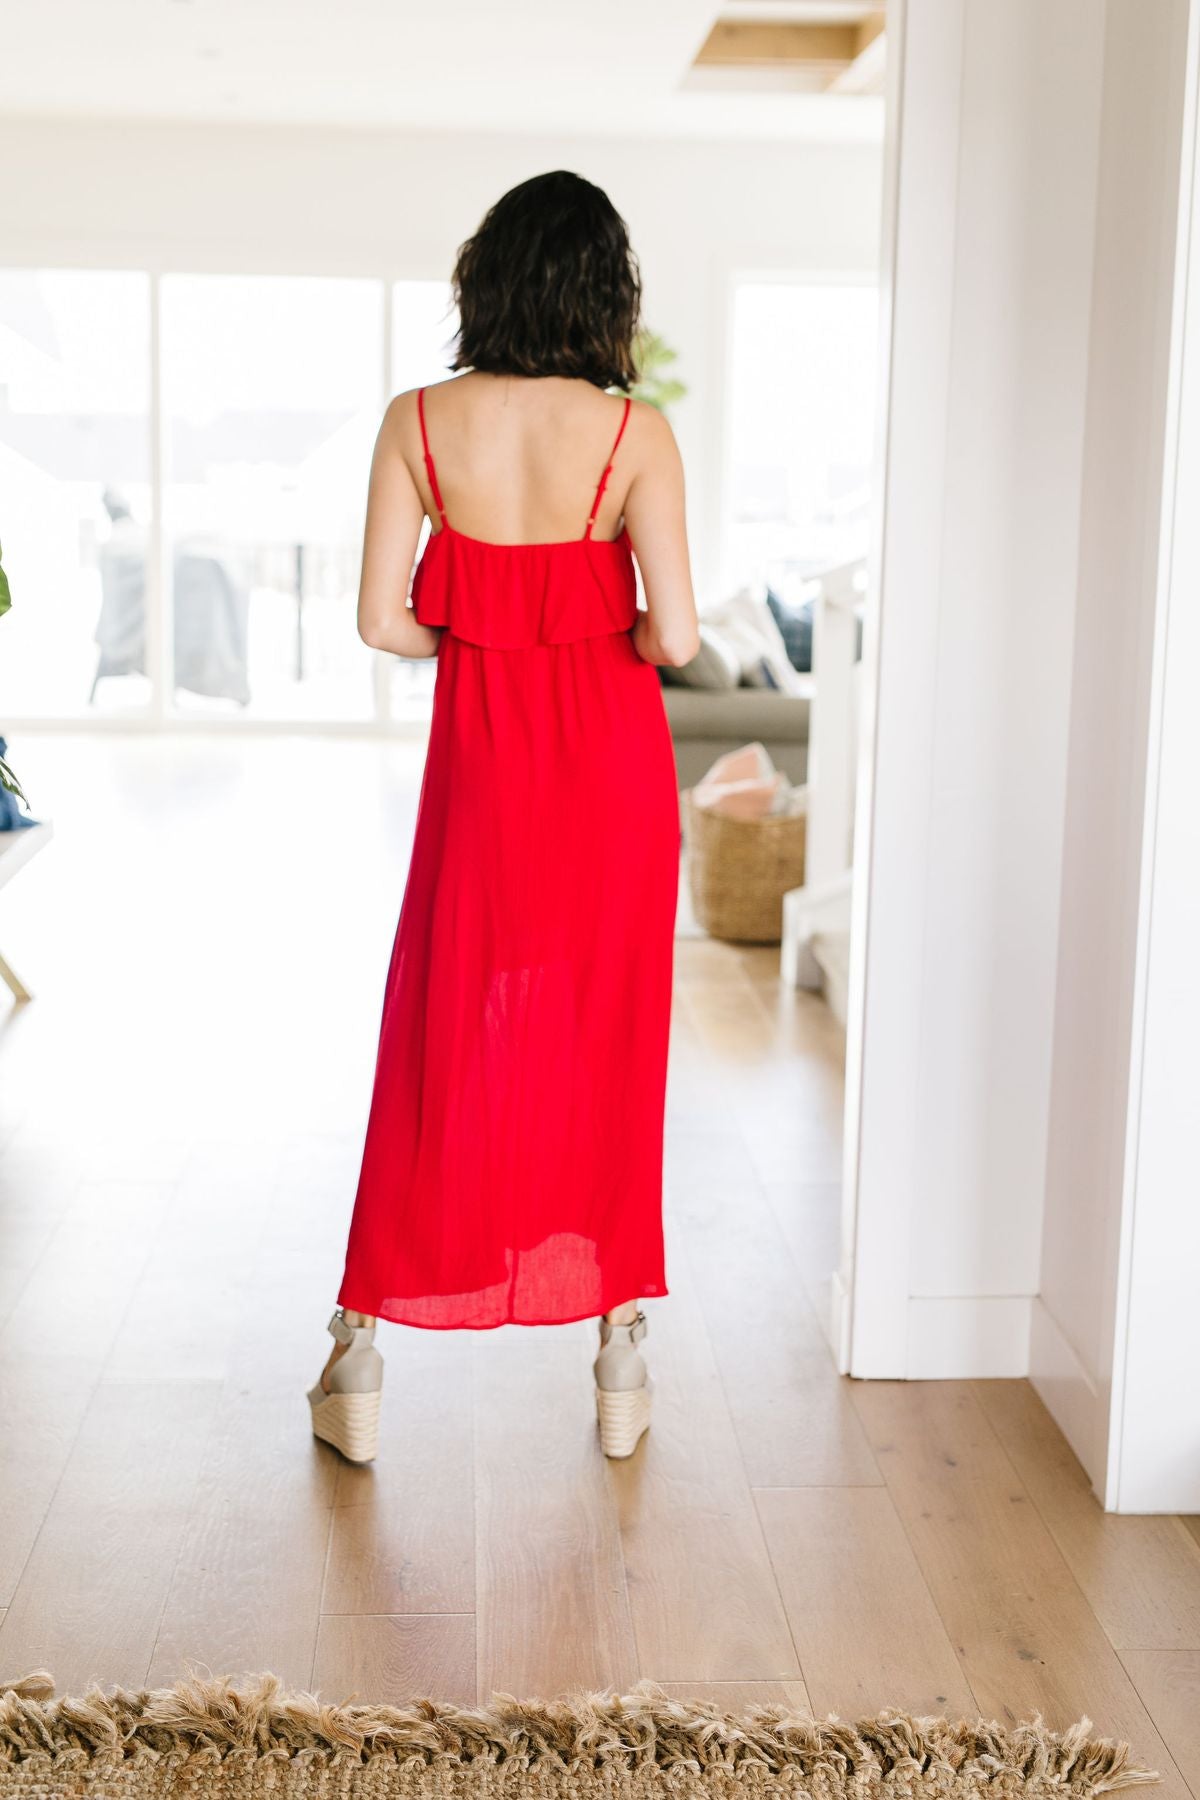 Red Hot Maxi